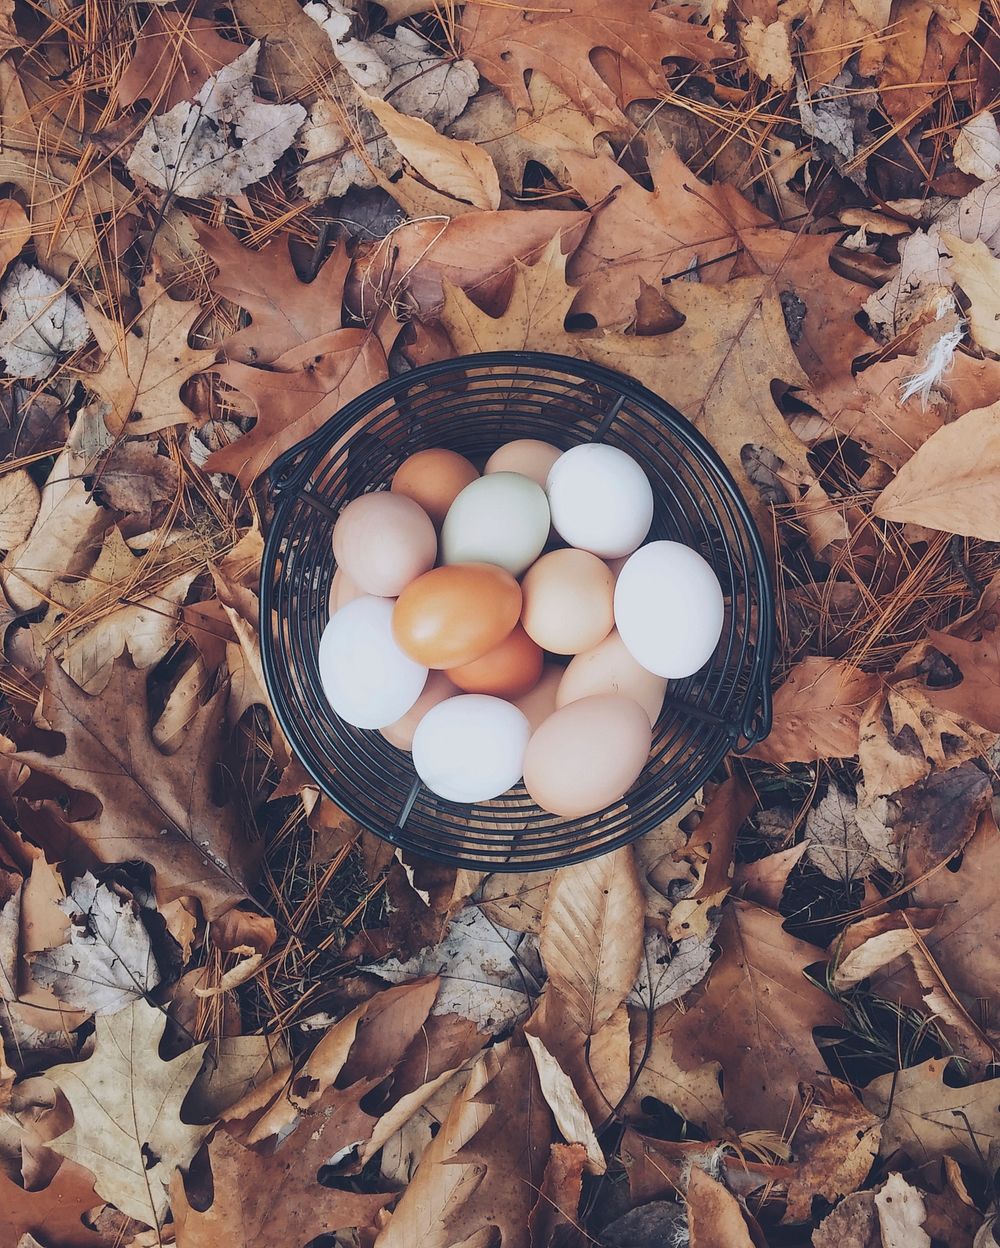 Basket of fresh chicken eggs atop fallen autumn leaves. Original public domain image from Wikimedia Commons